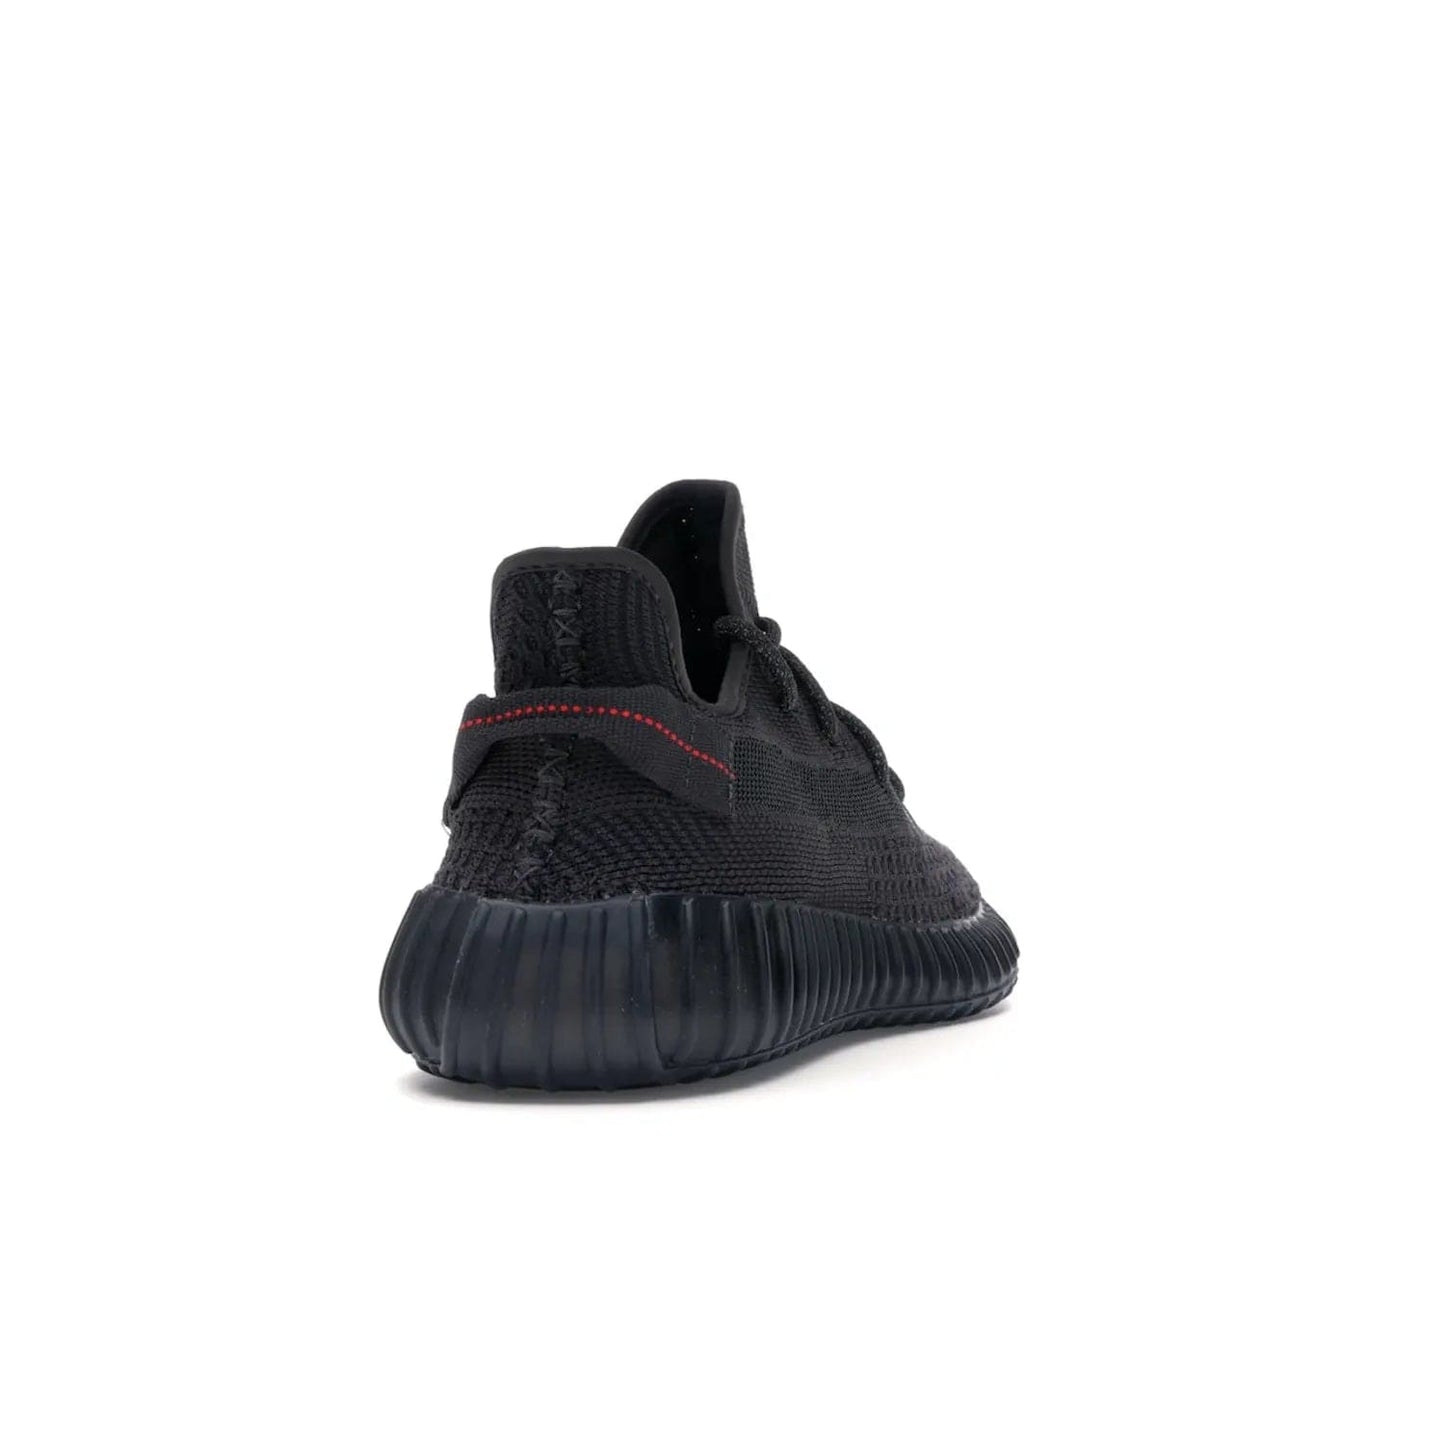 adidas Yeezy Boost 350 V2 Black (Non-Reflective) - Image 30 - Only at www.BallersClubKickz.com - A timeless, sleek silhouette crafted from quality materials. The adidas Yeezy Boost 350 V2 Black (Non-Reflective) brings style and sophistication. Get yours now!